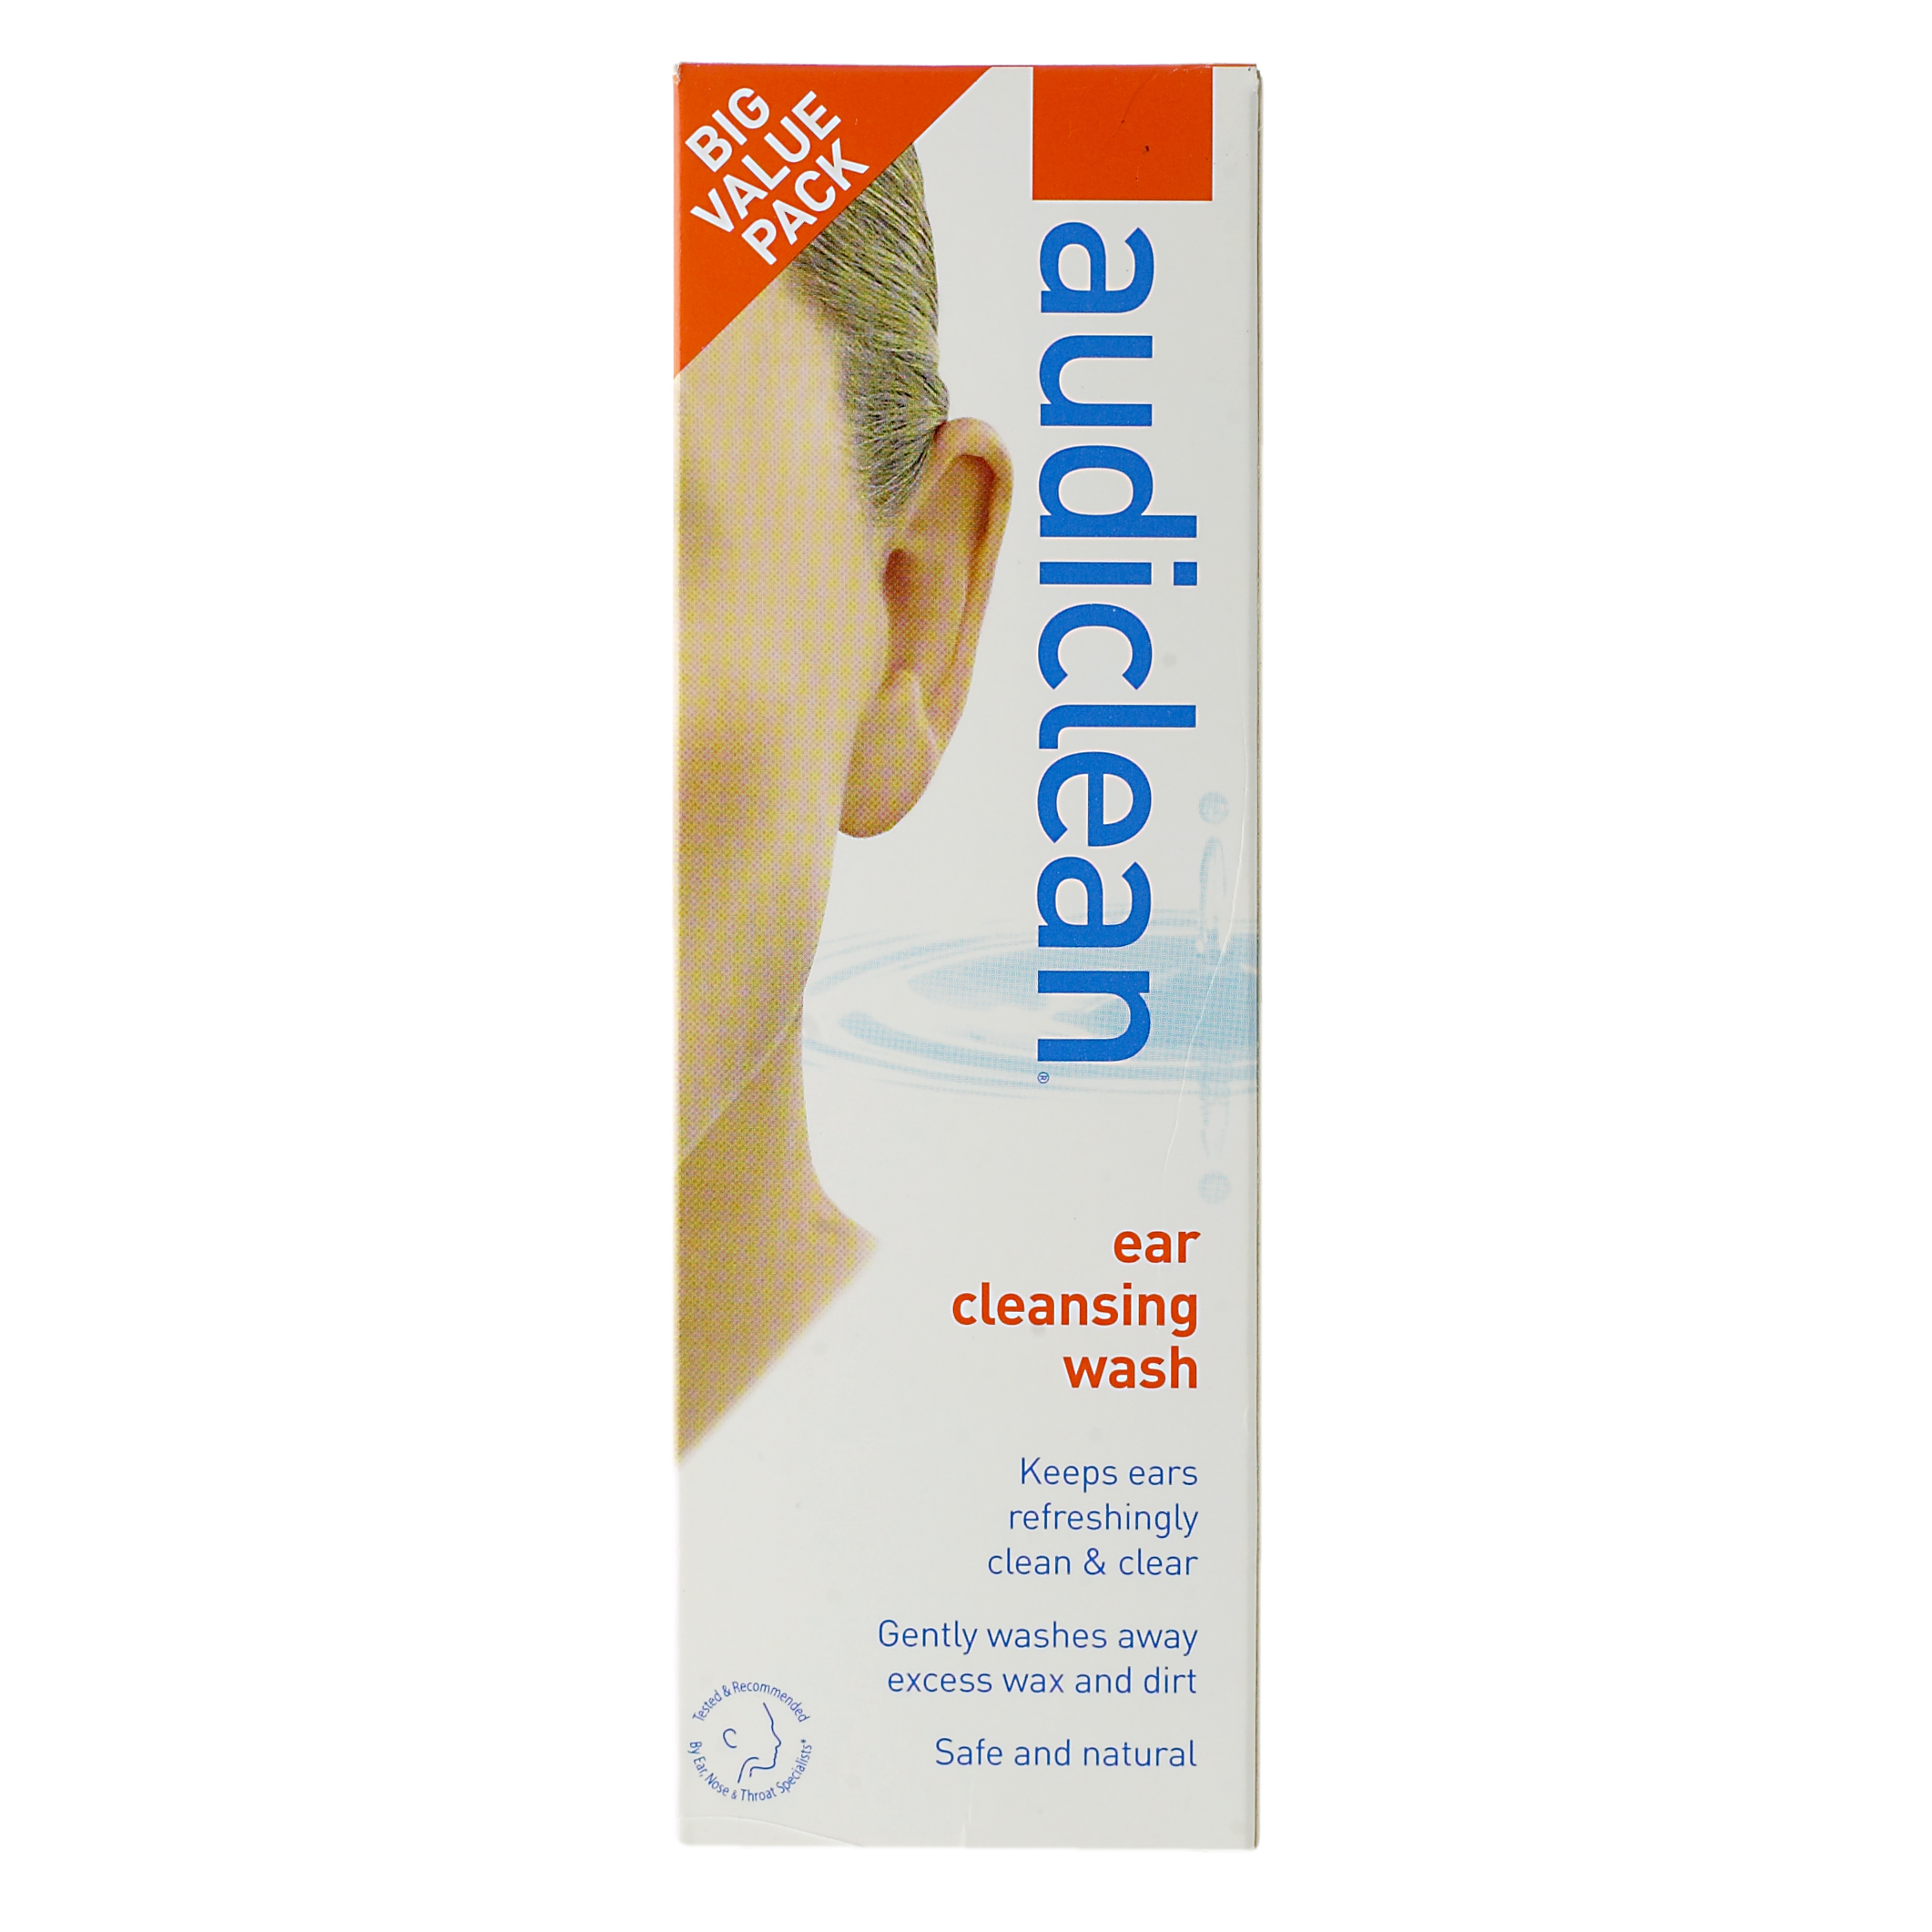 Audiclean Ear Cleansing Wash